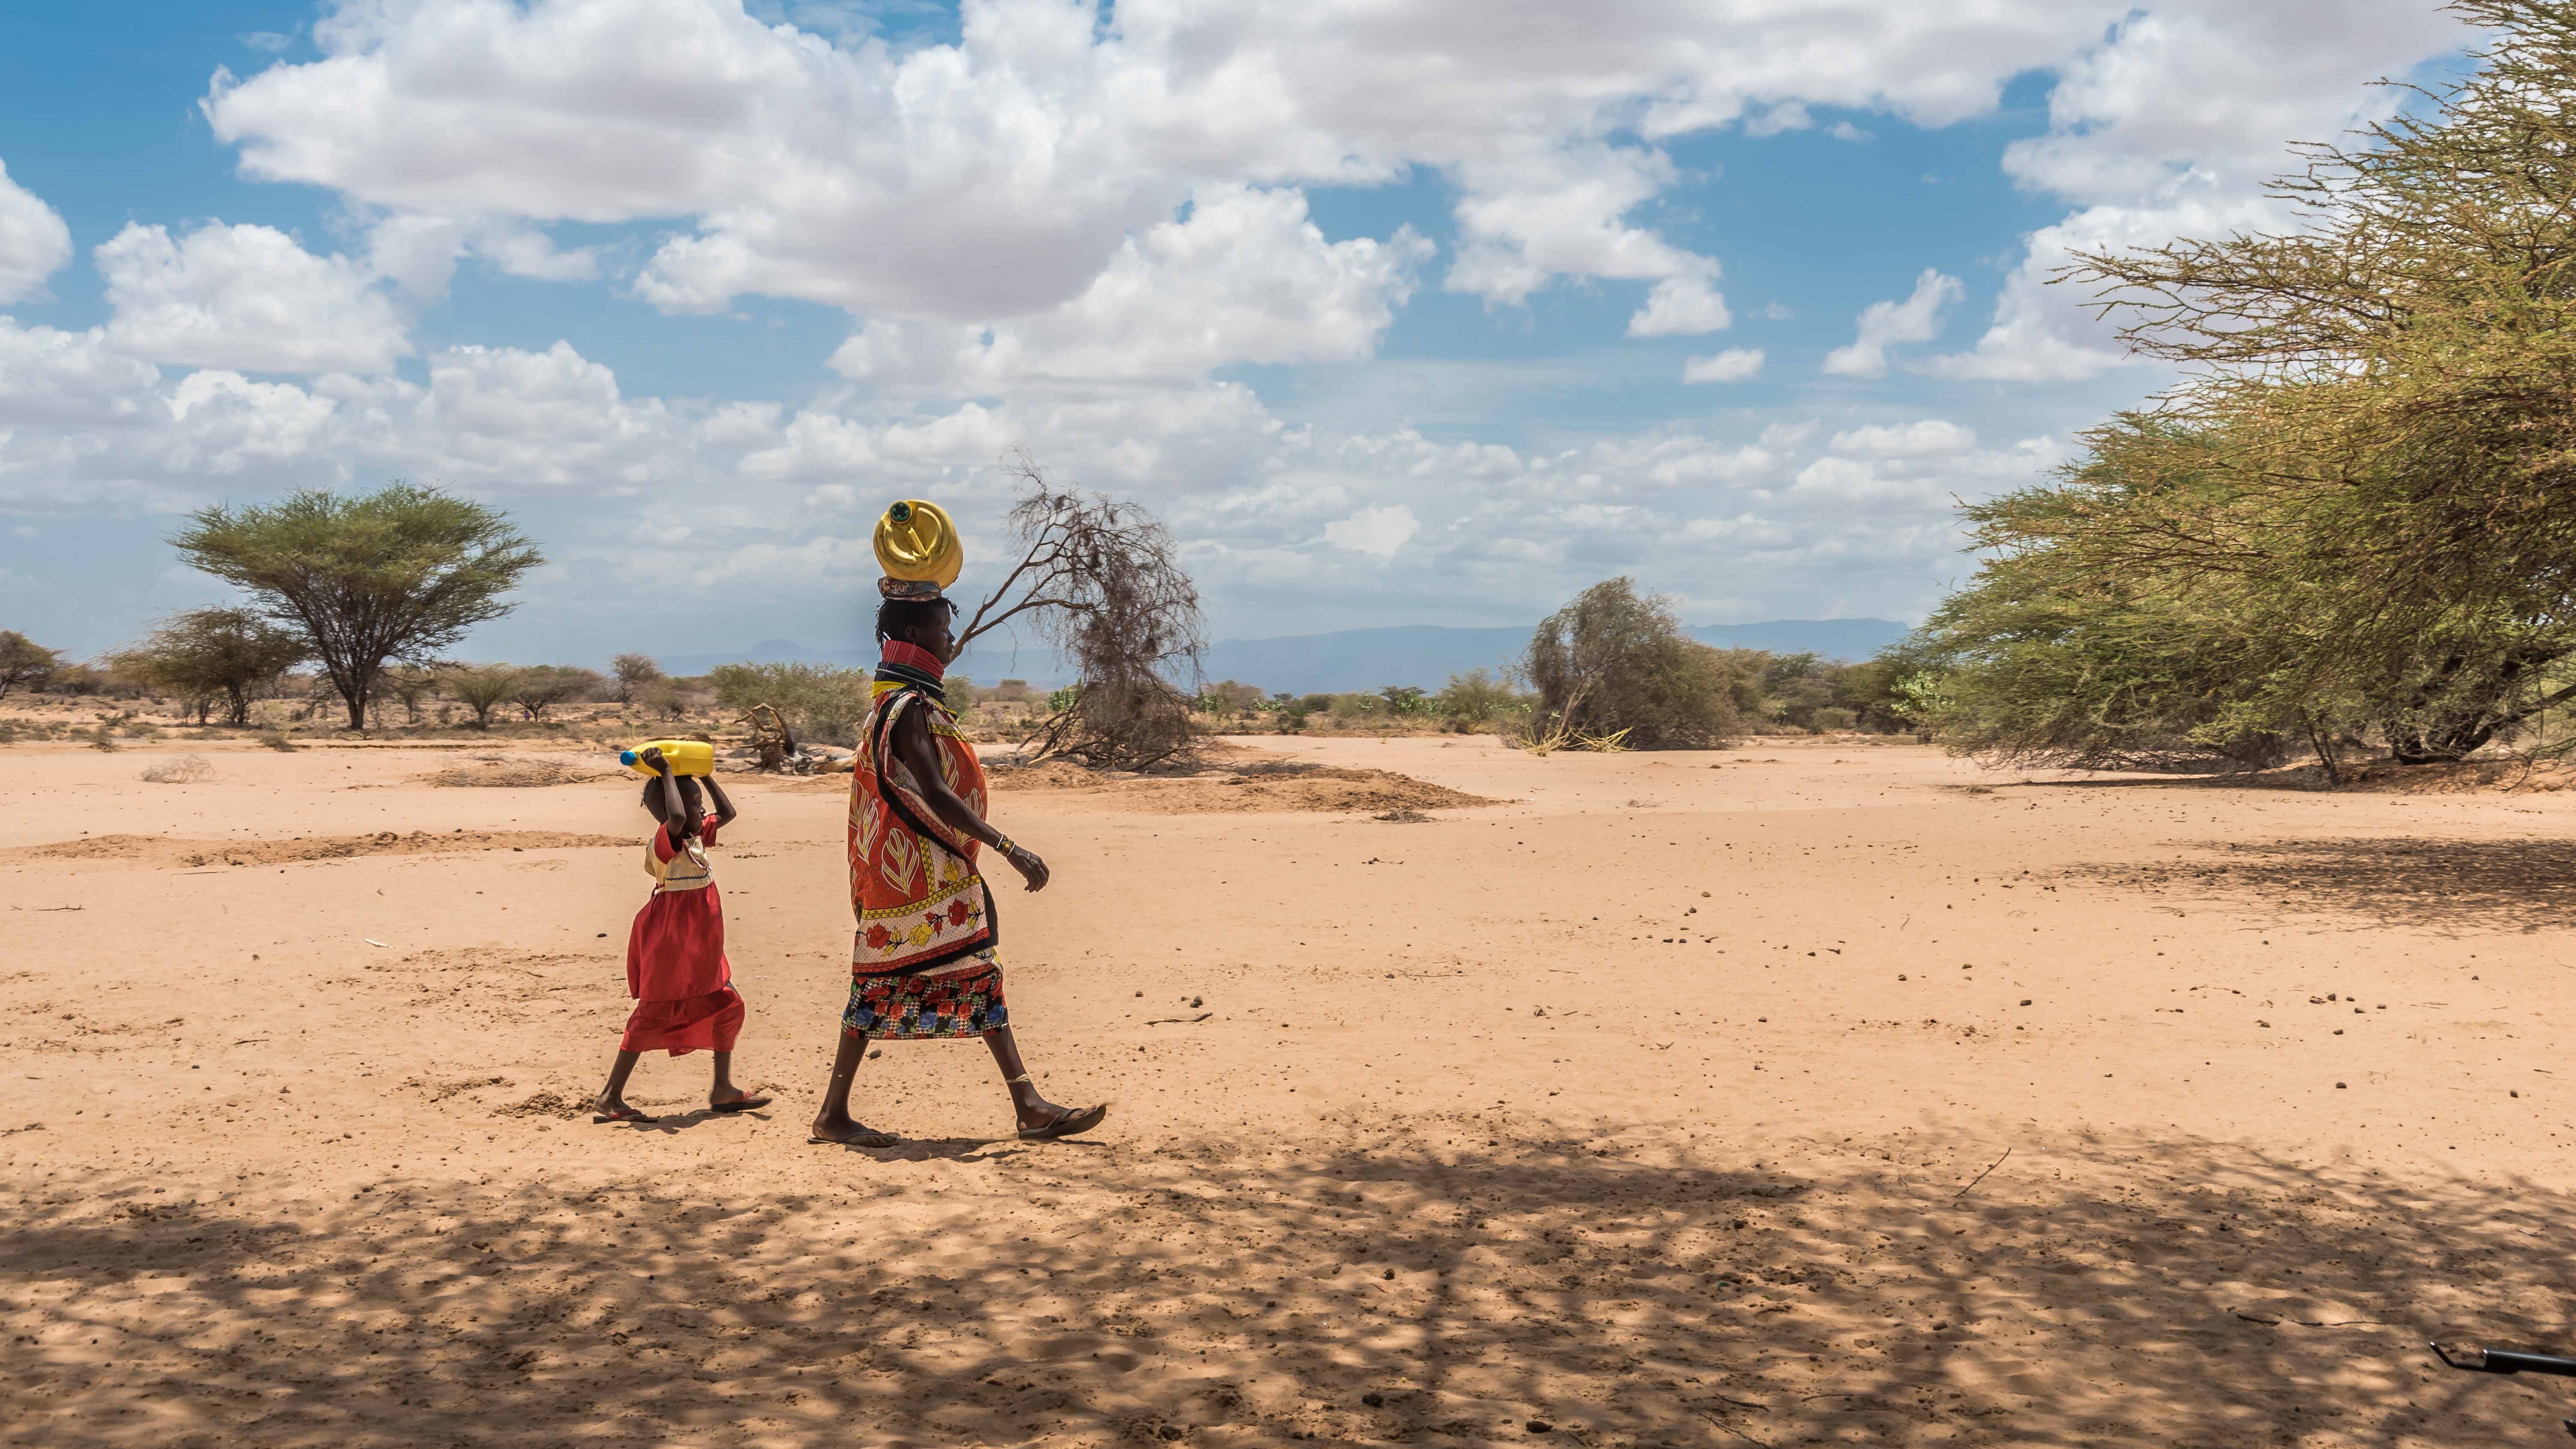 A woman and child walking and carrying water.